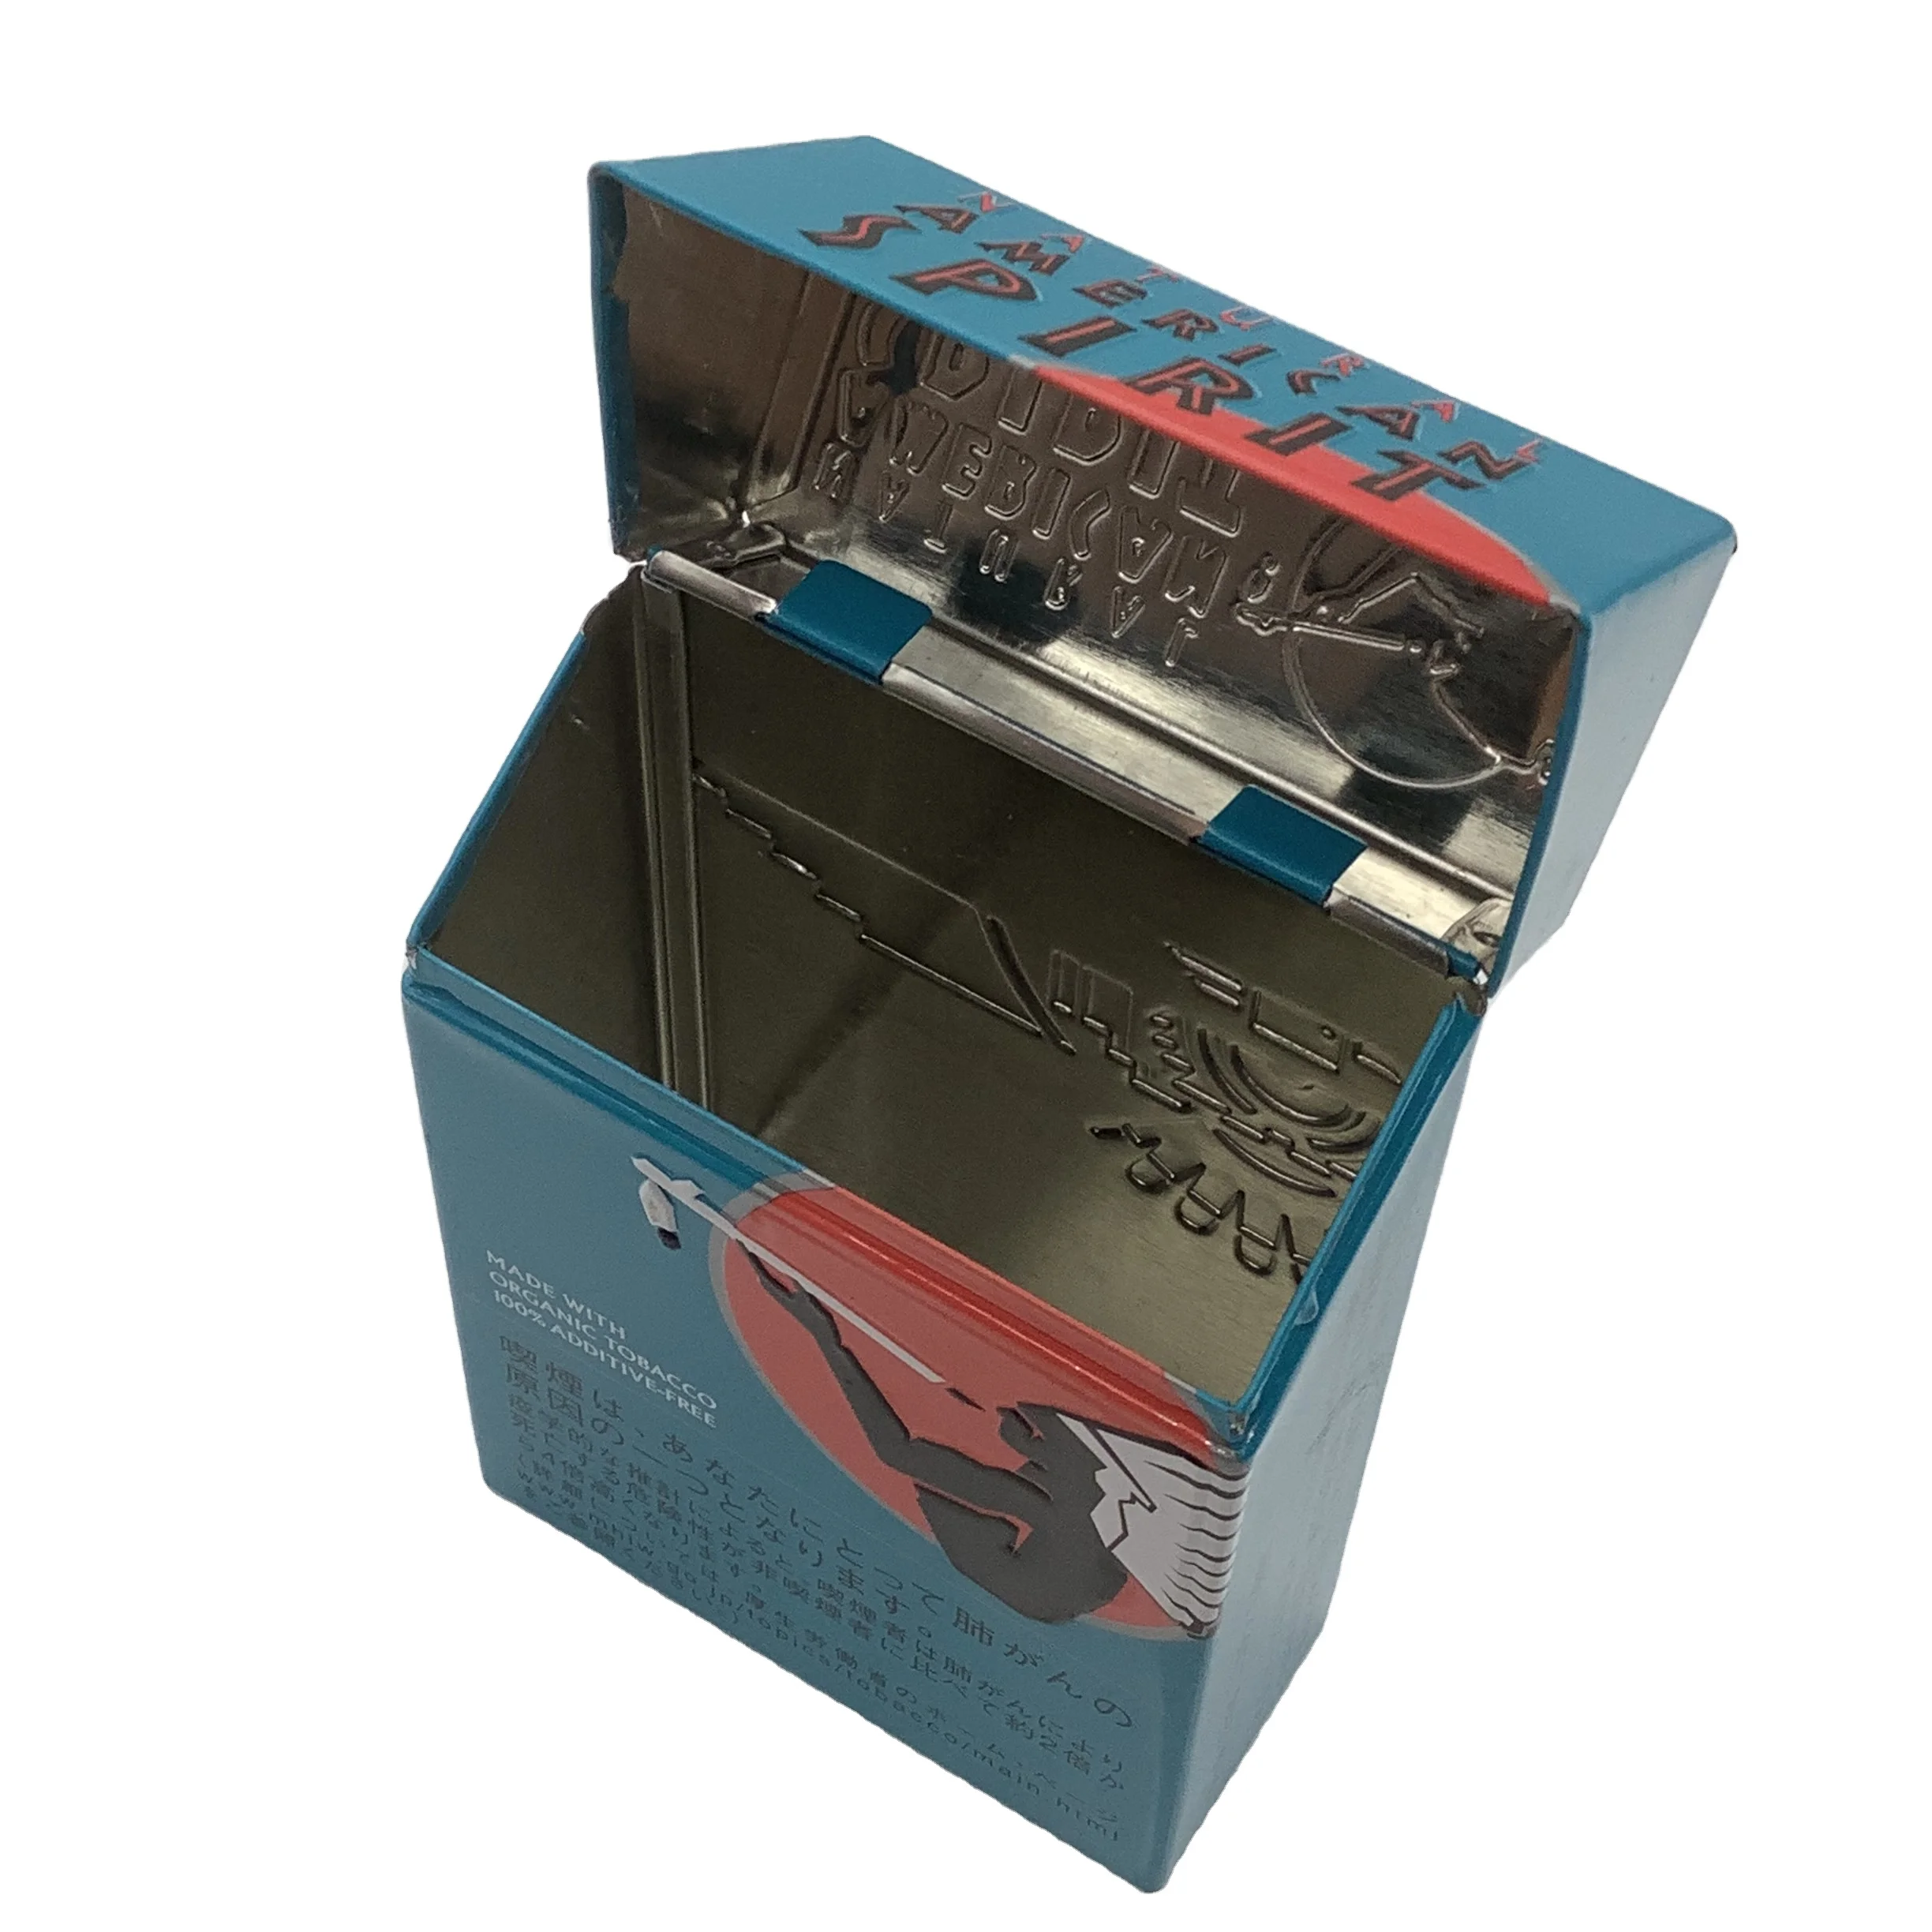 Wholesale China Hot sell Fashion personality Stainless steel metal tobacco  box cigarette box case 14pcs From m.